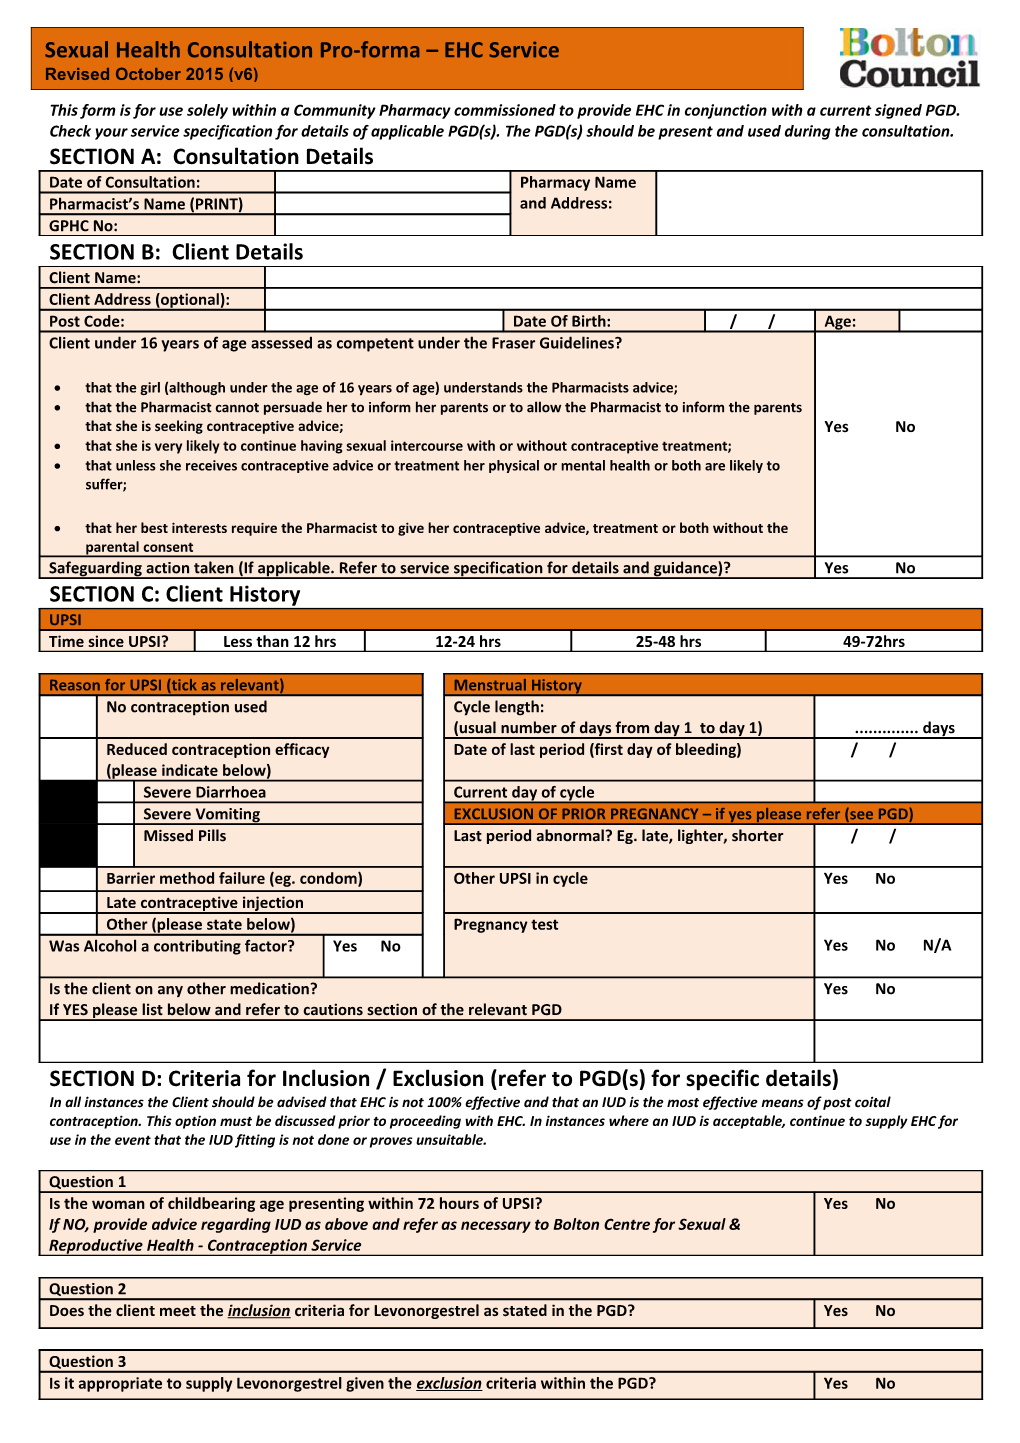 This Form Is for Use Solely Within a Community Pharmacy Commissioned to Provide EHC In